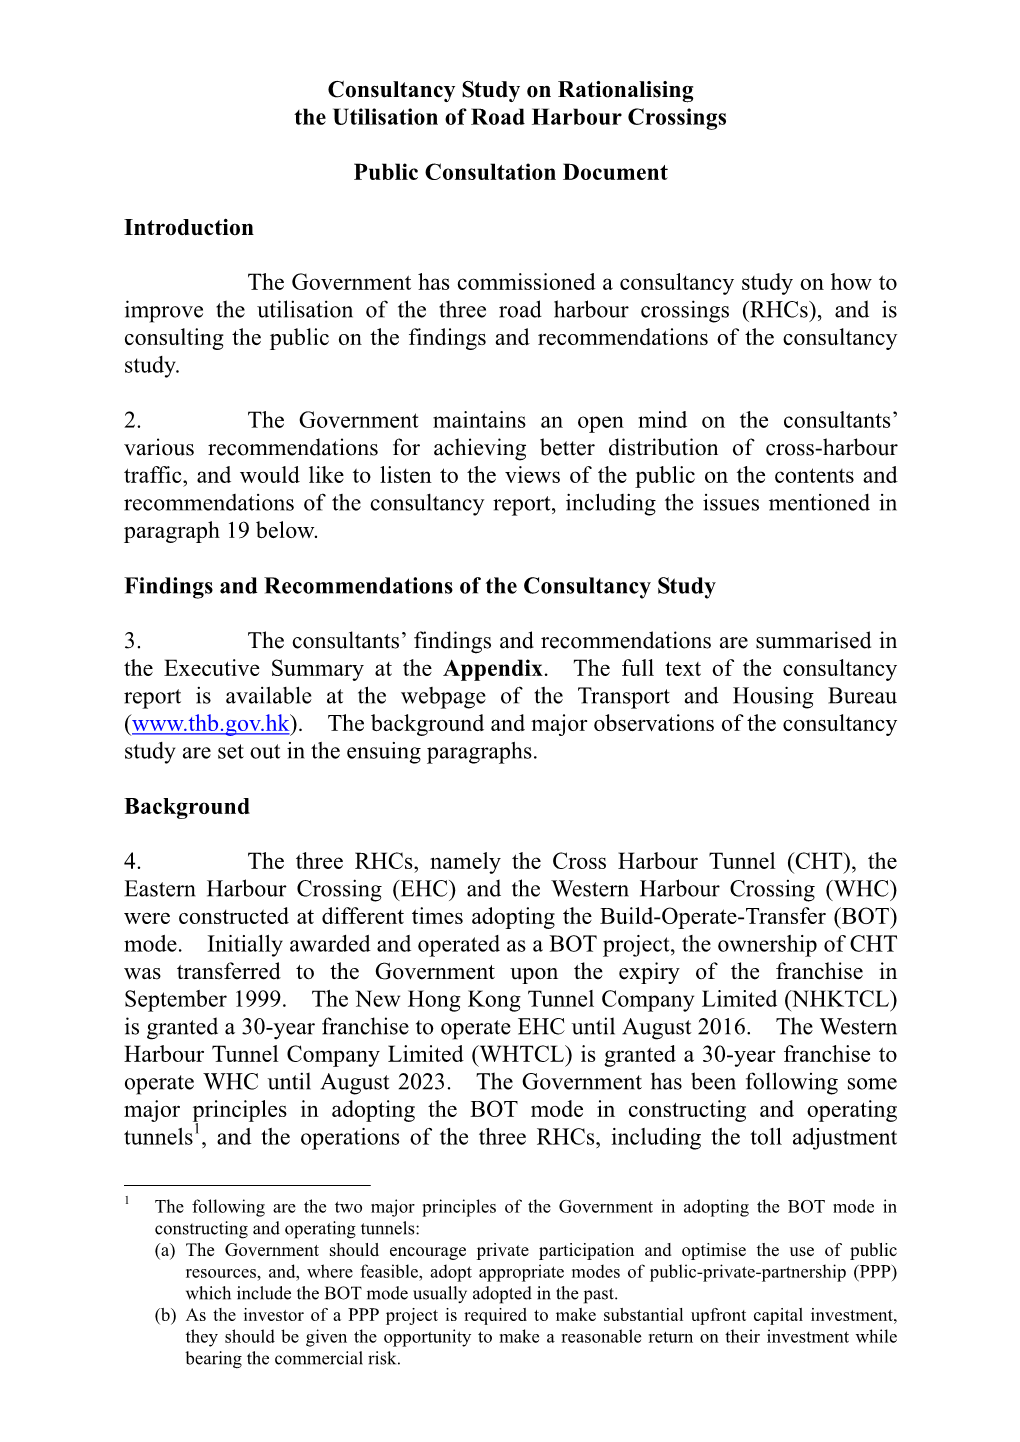 Consultancy Study on Rationalising the Utilisation of Road Harbour Crossings